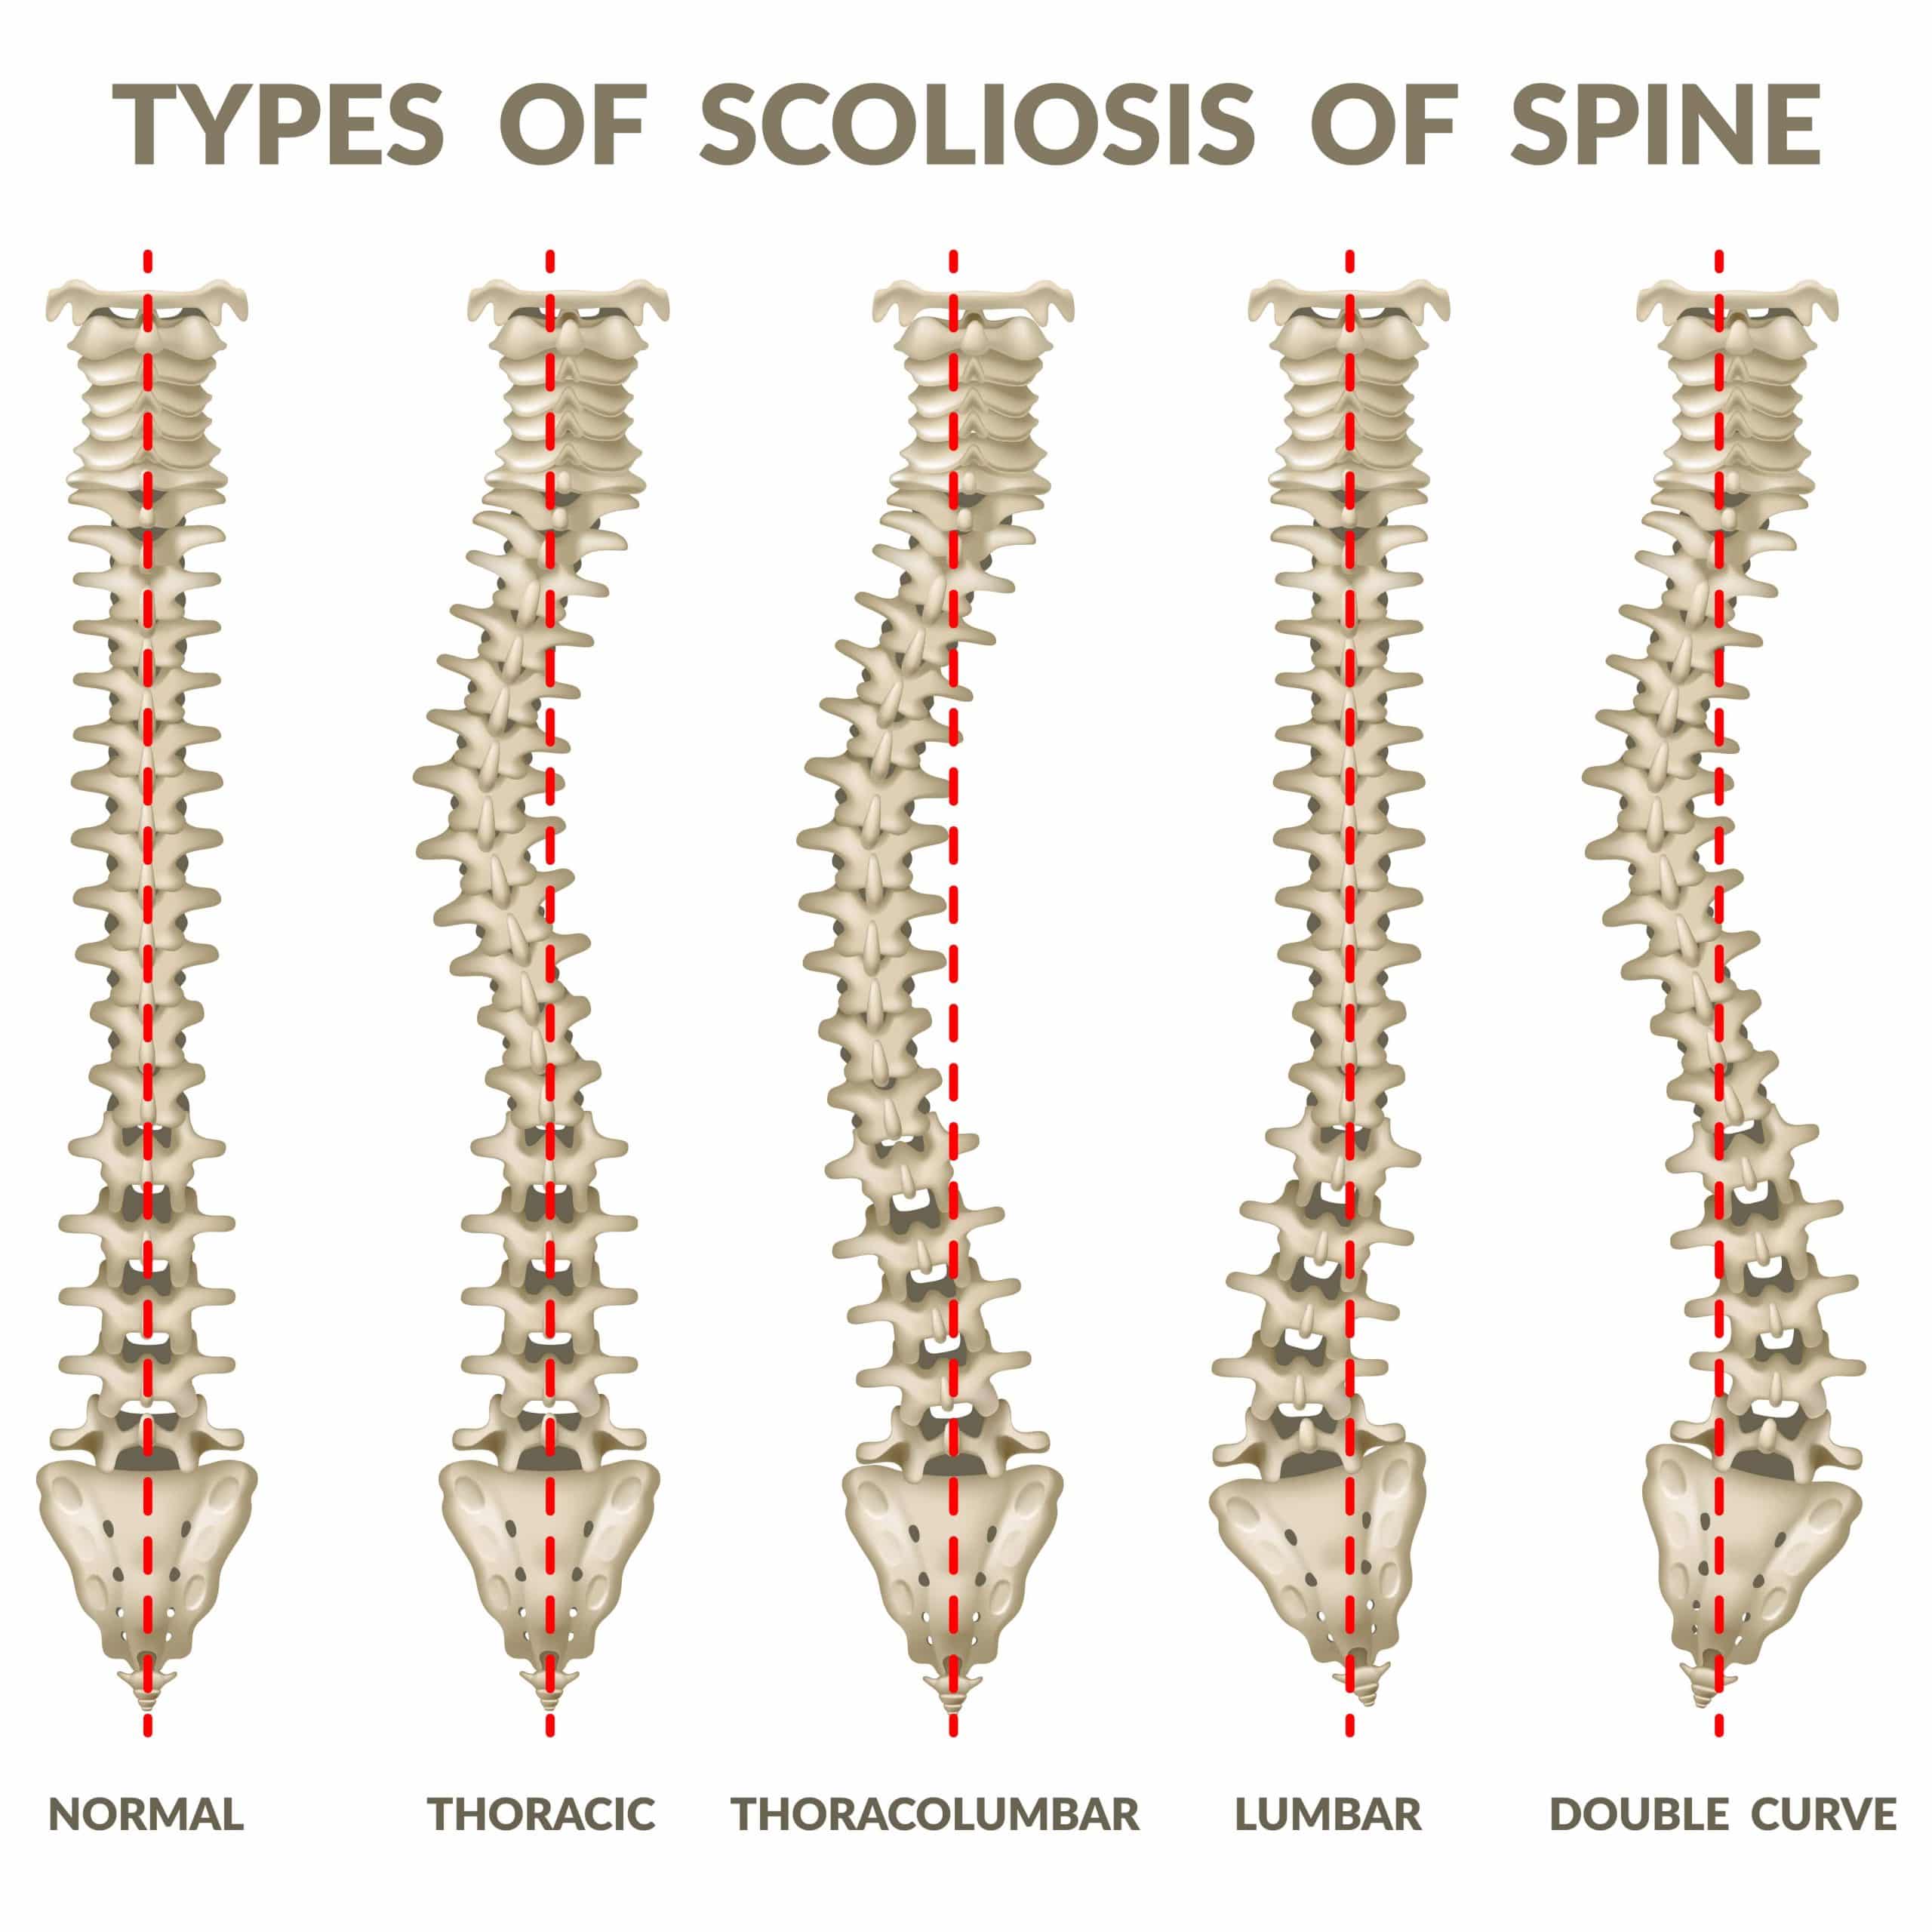 What is the difference between scoliosis and levoscoliosis?